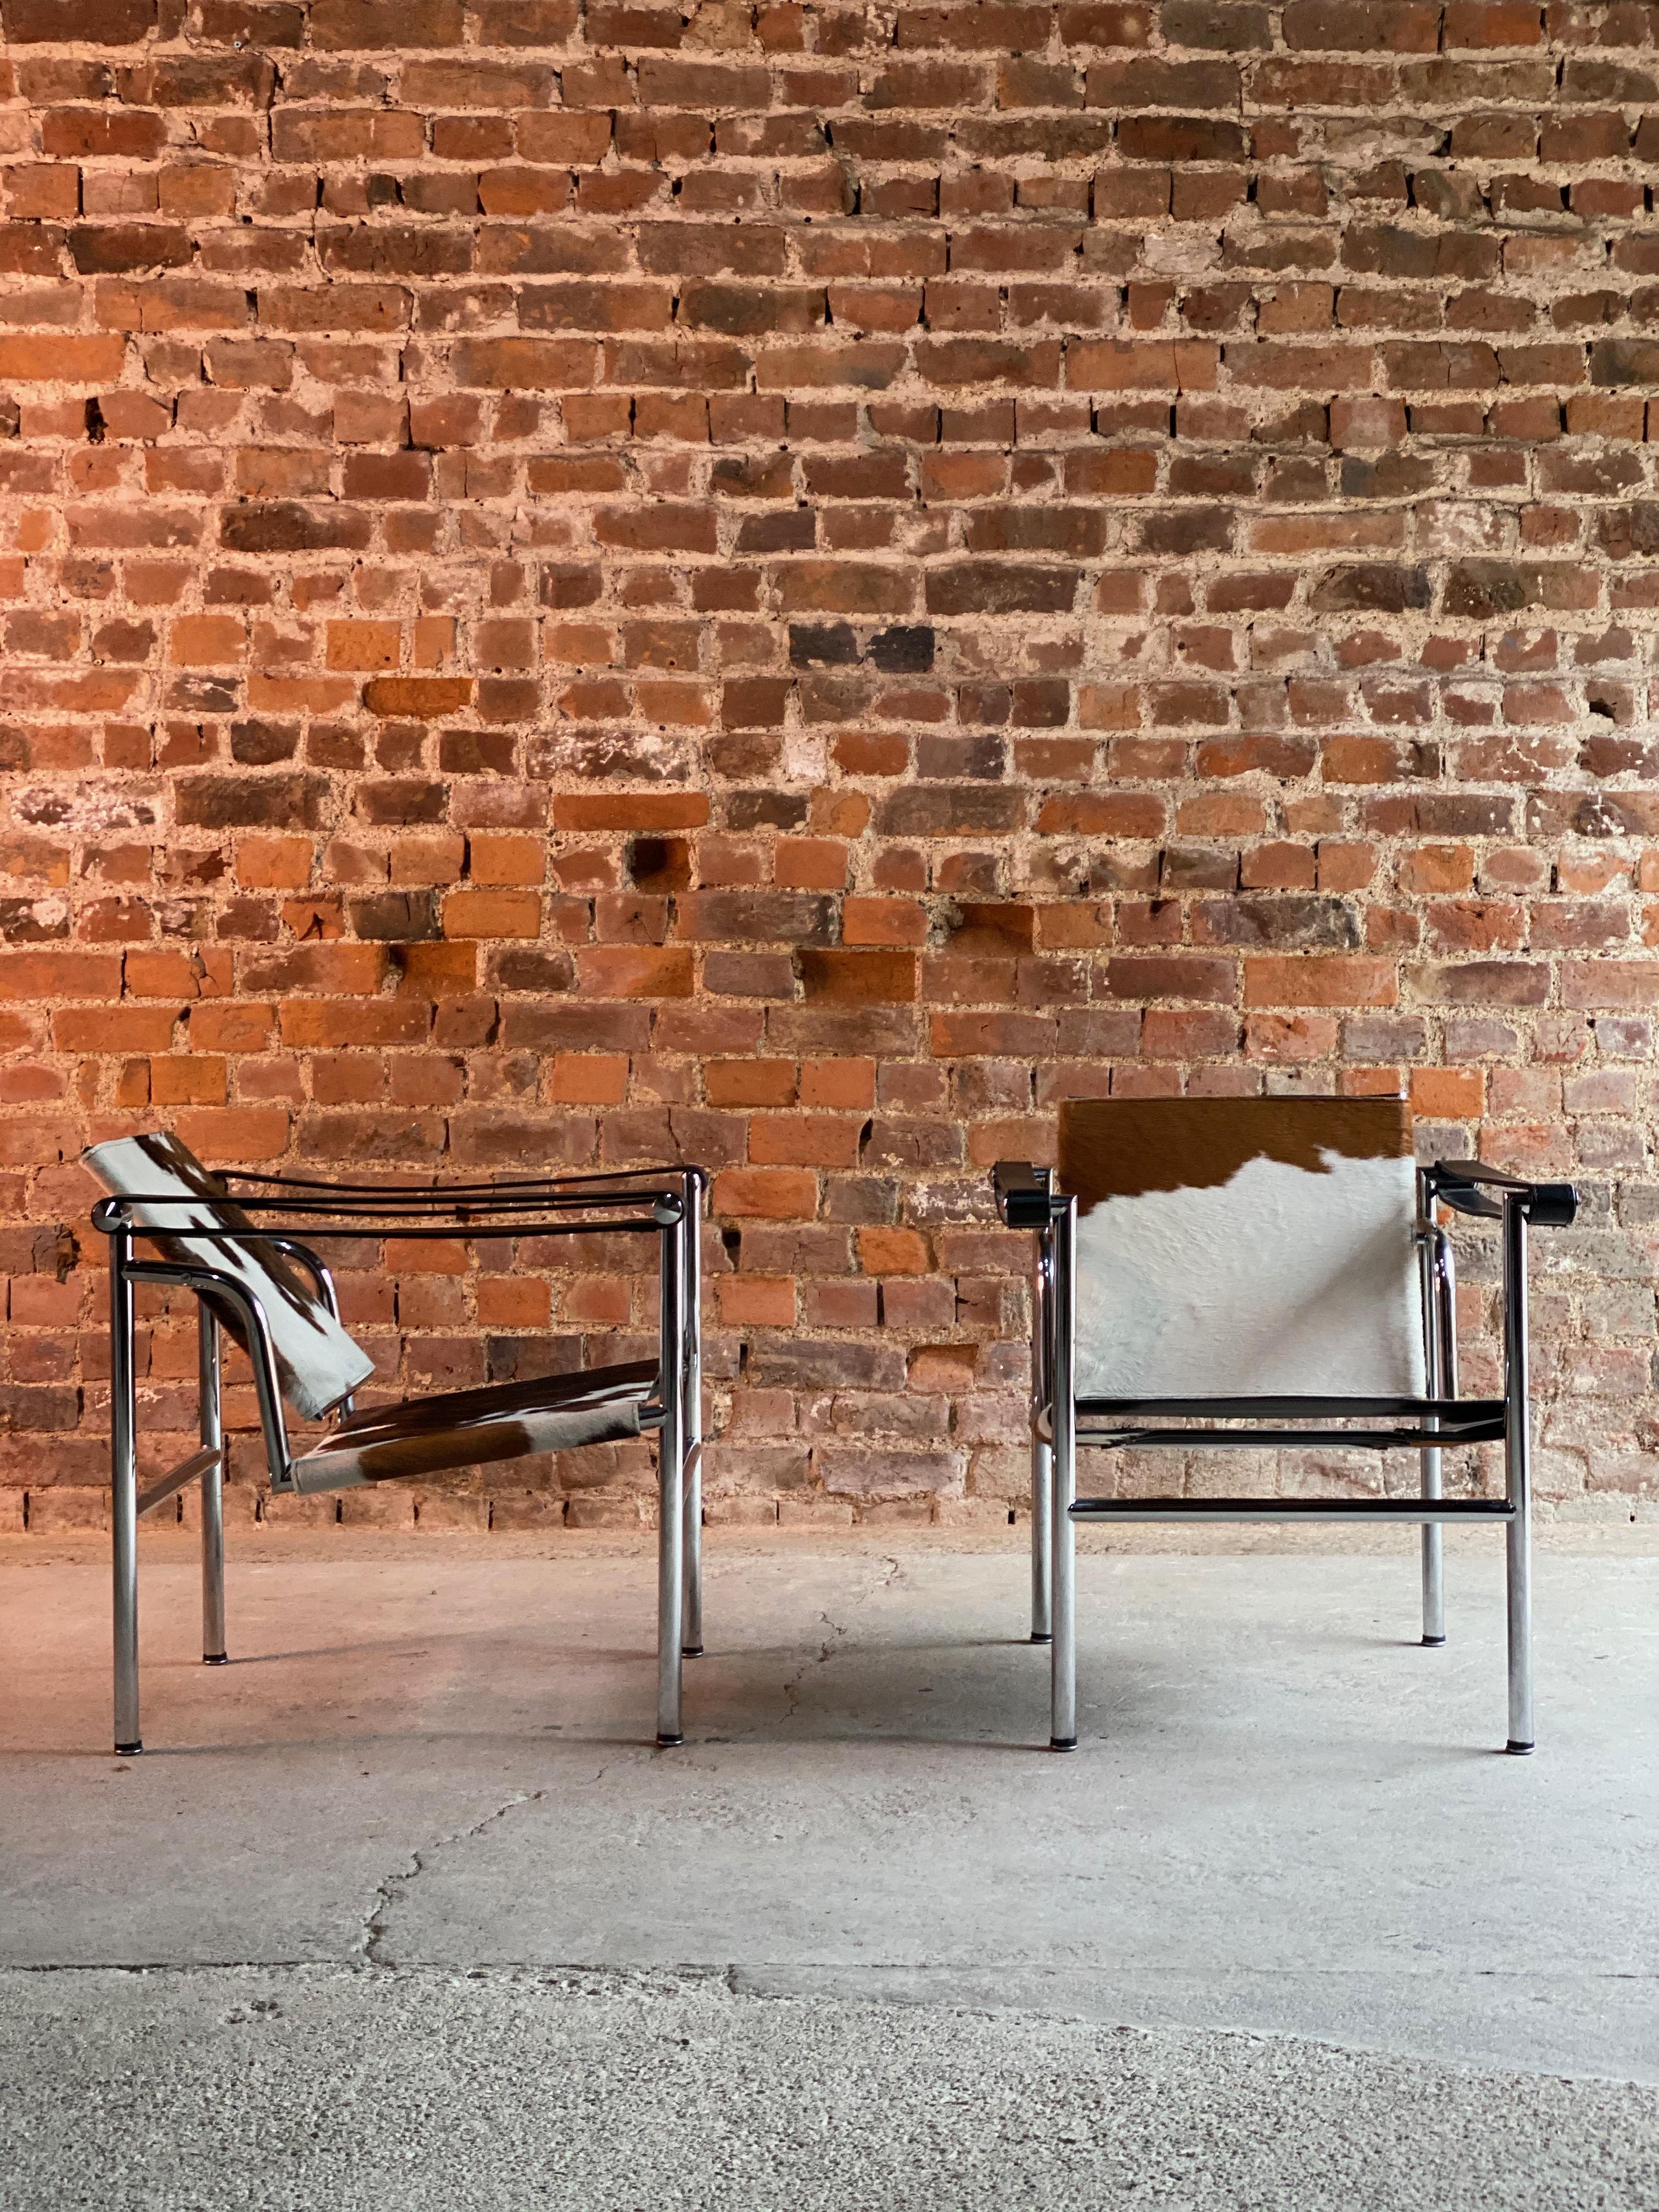 Le Corbusier LC1 Basculant chairs by Charlotte Perriand and Pierre Jeanneret

Fauteuil à dossier Basculant pair of original LC1 Basculant armchairs by Le Corbusier, Pierre Jeanneret, & Charlotte Perriand, finished in cow or pony hide on chrome